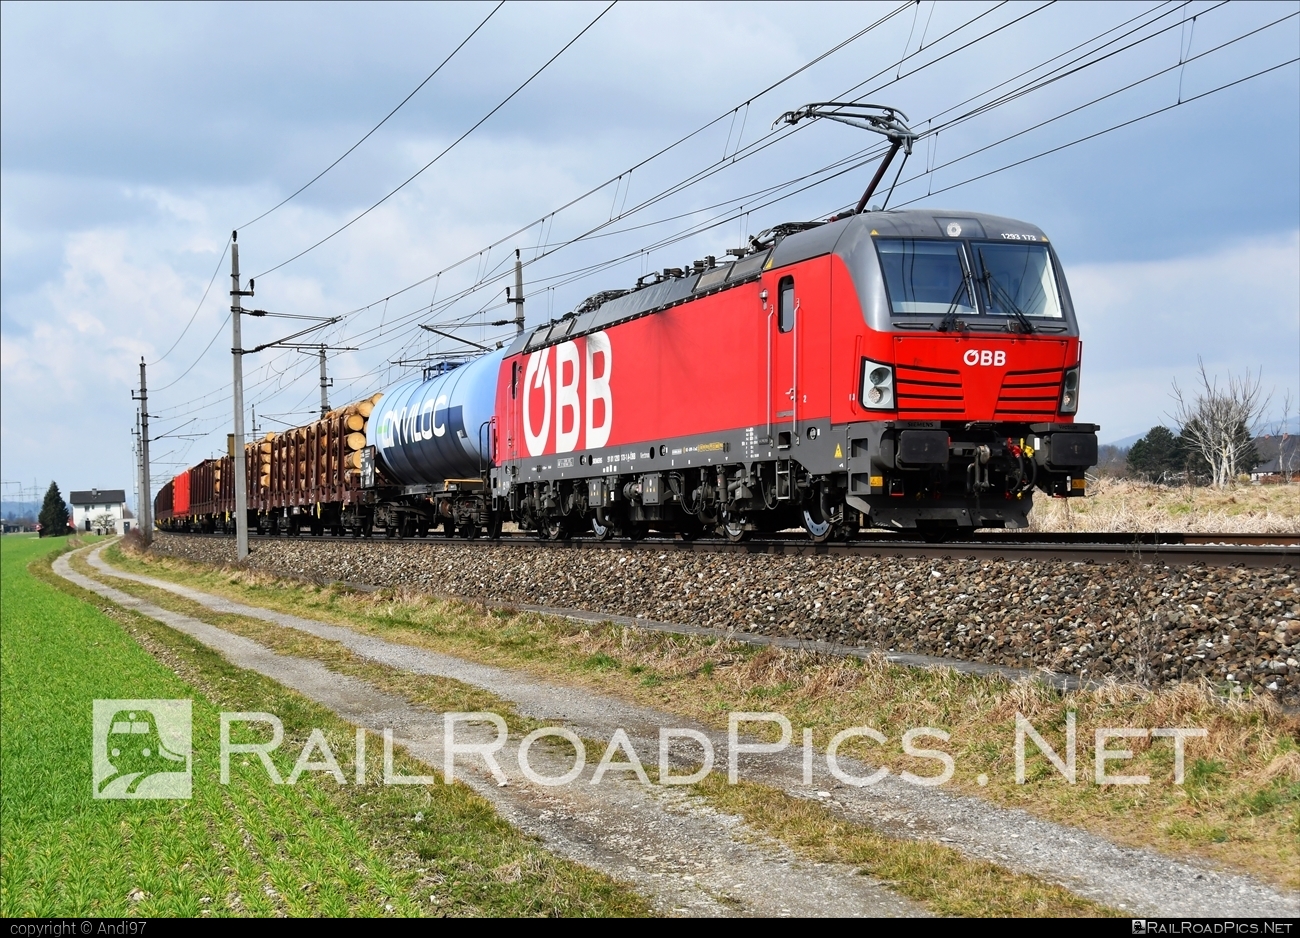 Siemens Vectron MS - 1293 173 operated by Rail Cargo Austria AG #mixofcargo #obb #osterreichischebundesbahnen #rcw #siemens #siemensVectron #siemensVectronMS #vectron #vectronMS